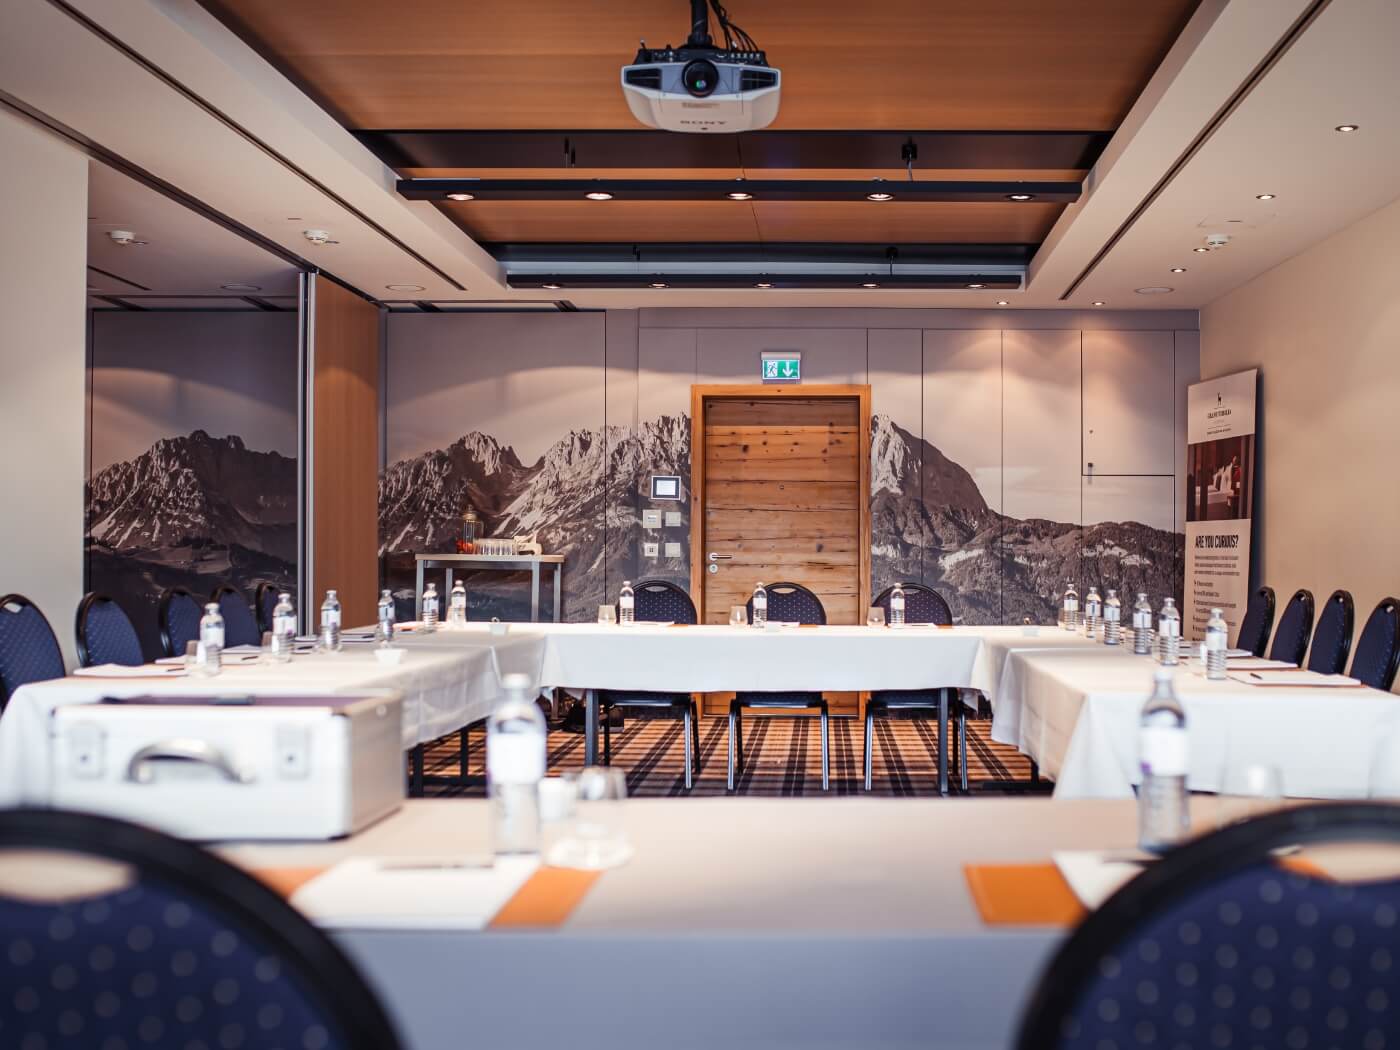 A meeting room with mountain panorama wallpaper at the conference hotel in Tyrol